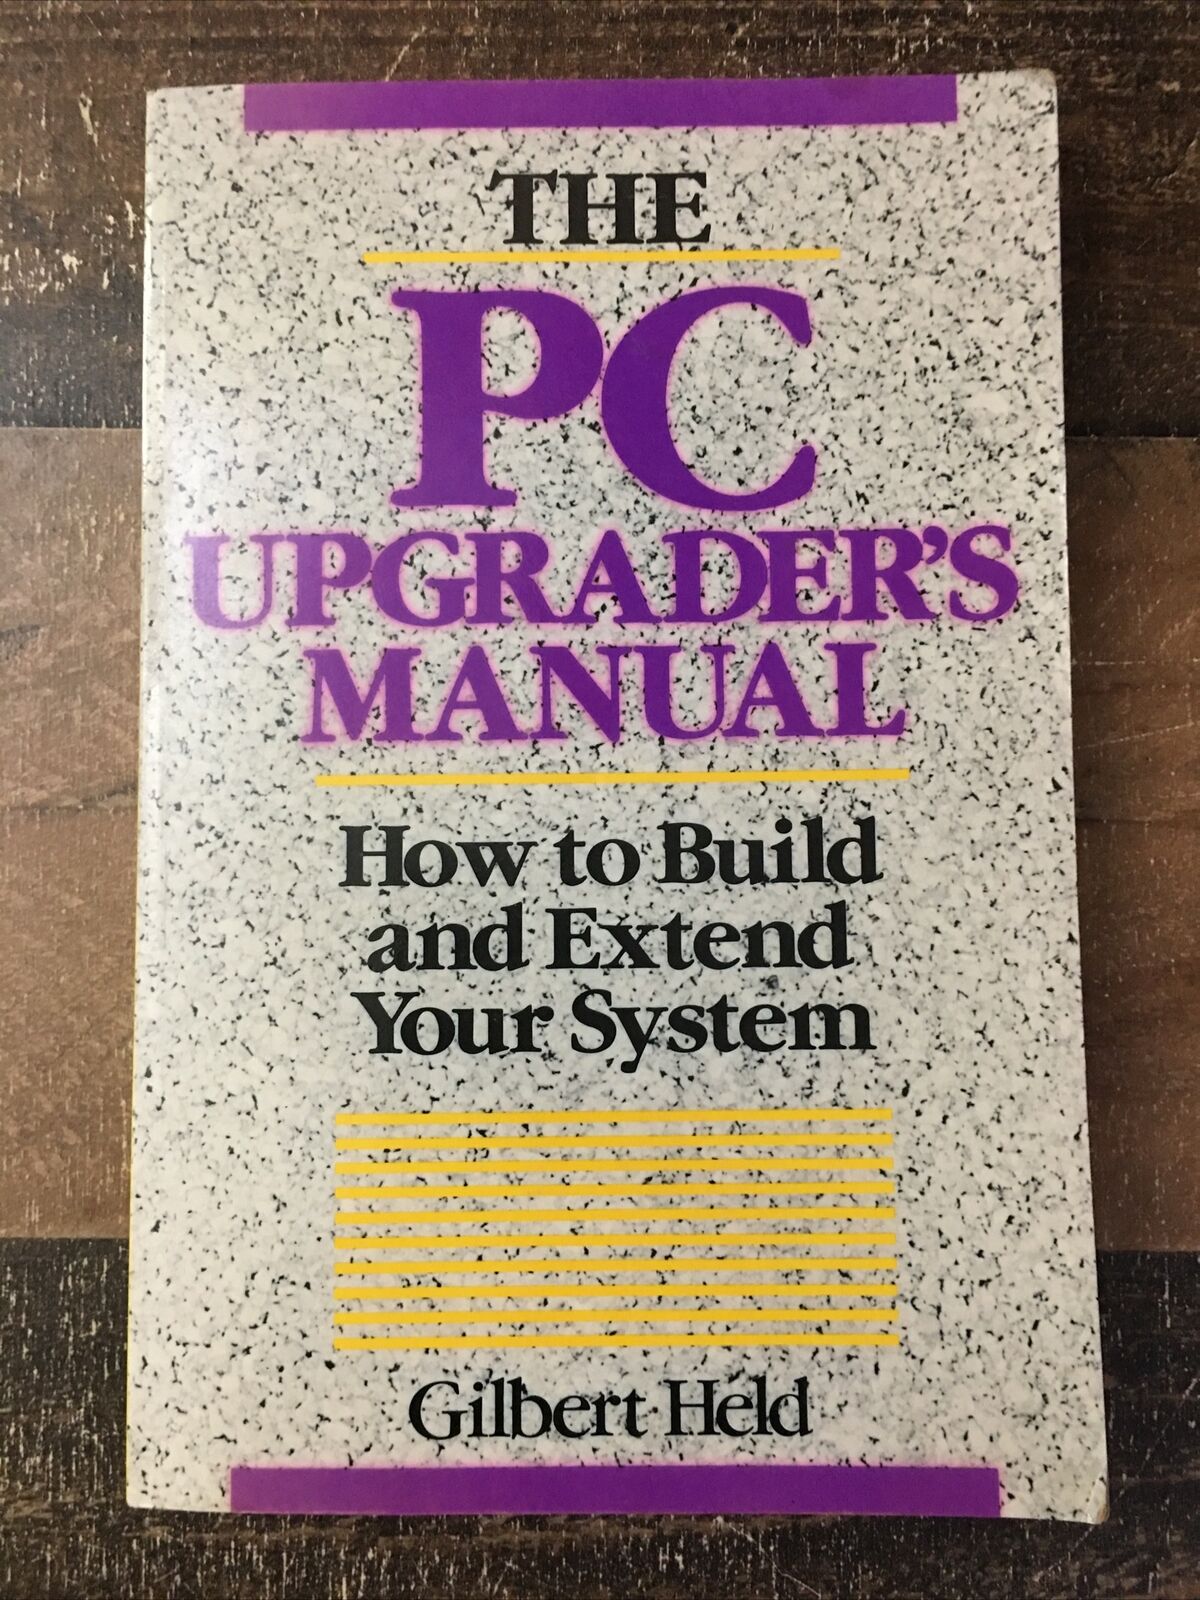 The PC Upgraders Manual: How To Build And Extend Your System by Gilbert Held